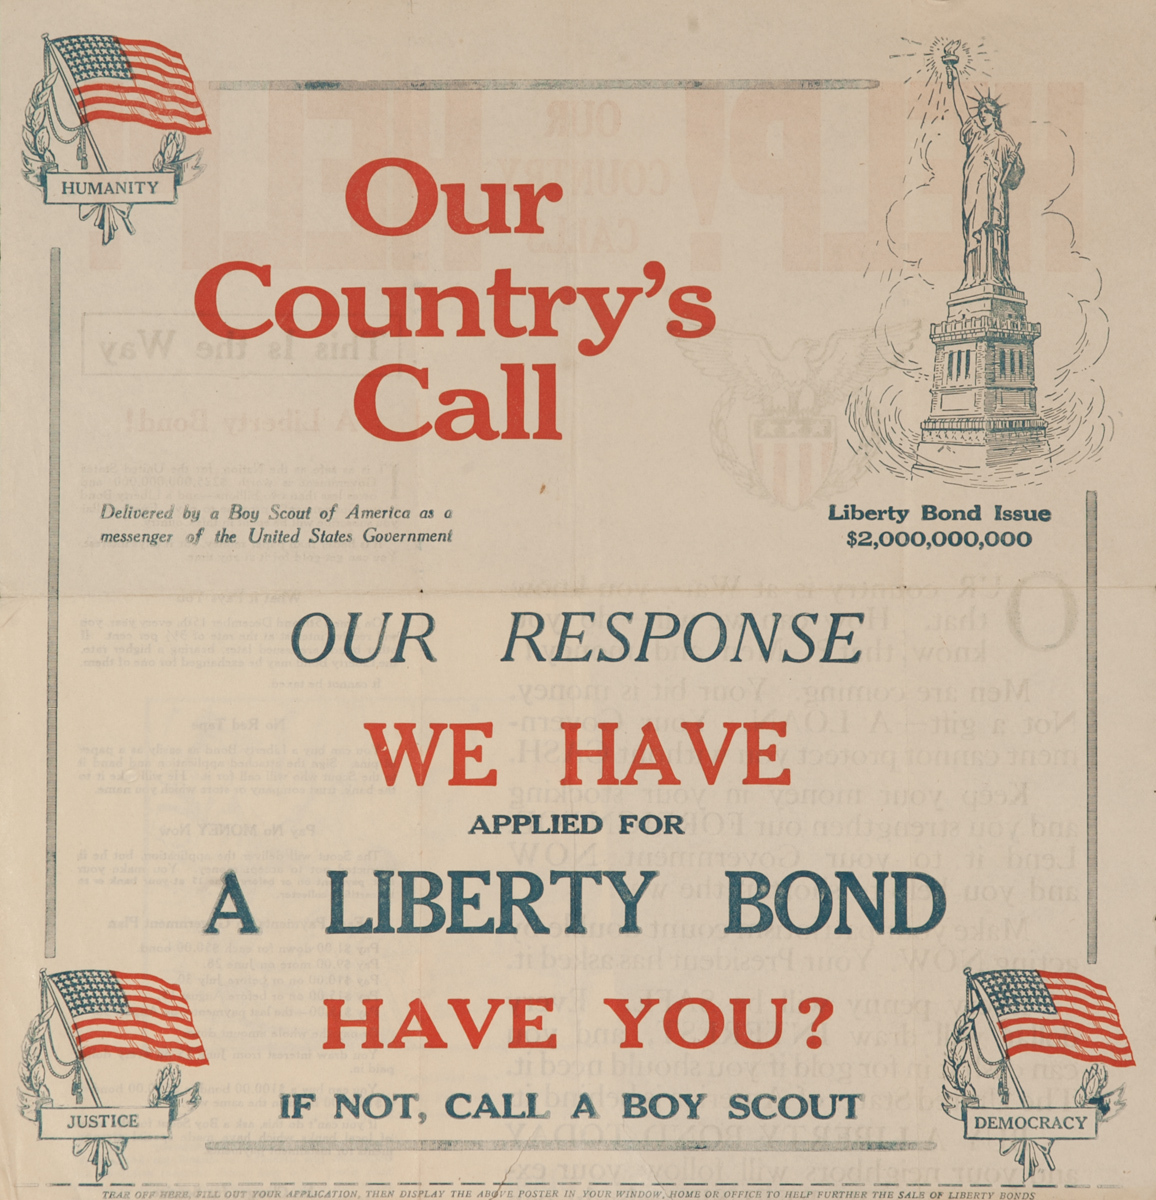 Our Country’s Call, Our Response, Original American WWI Bond Flyer